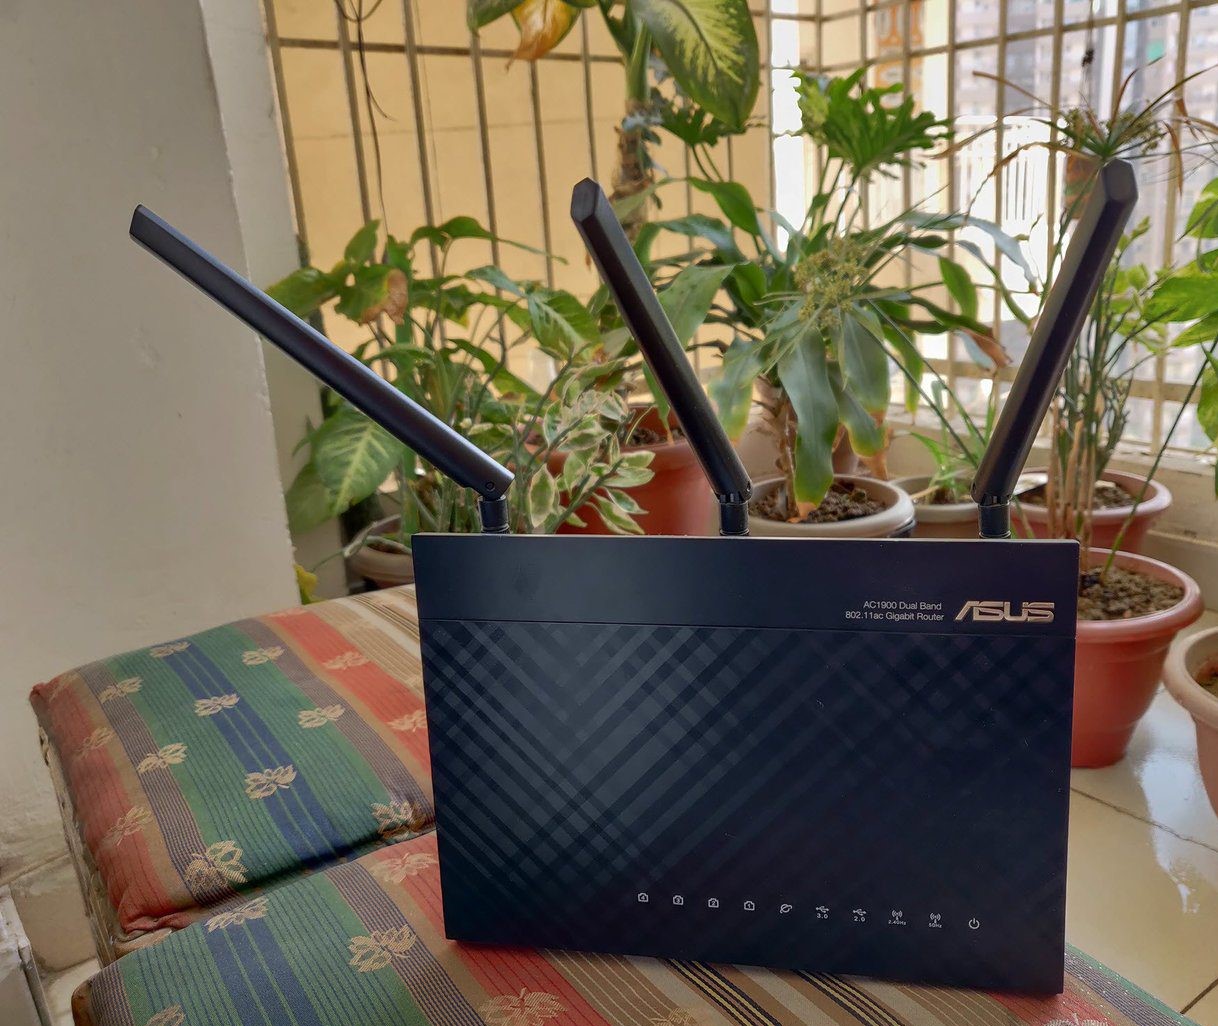 How To Change Asus Wi-Fi Router Password